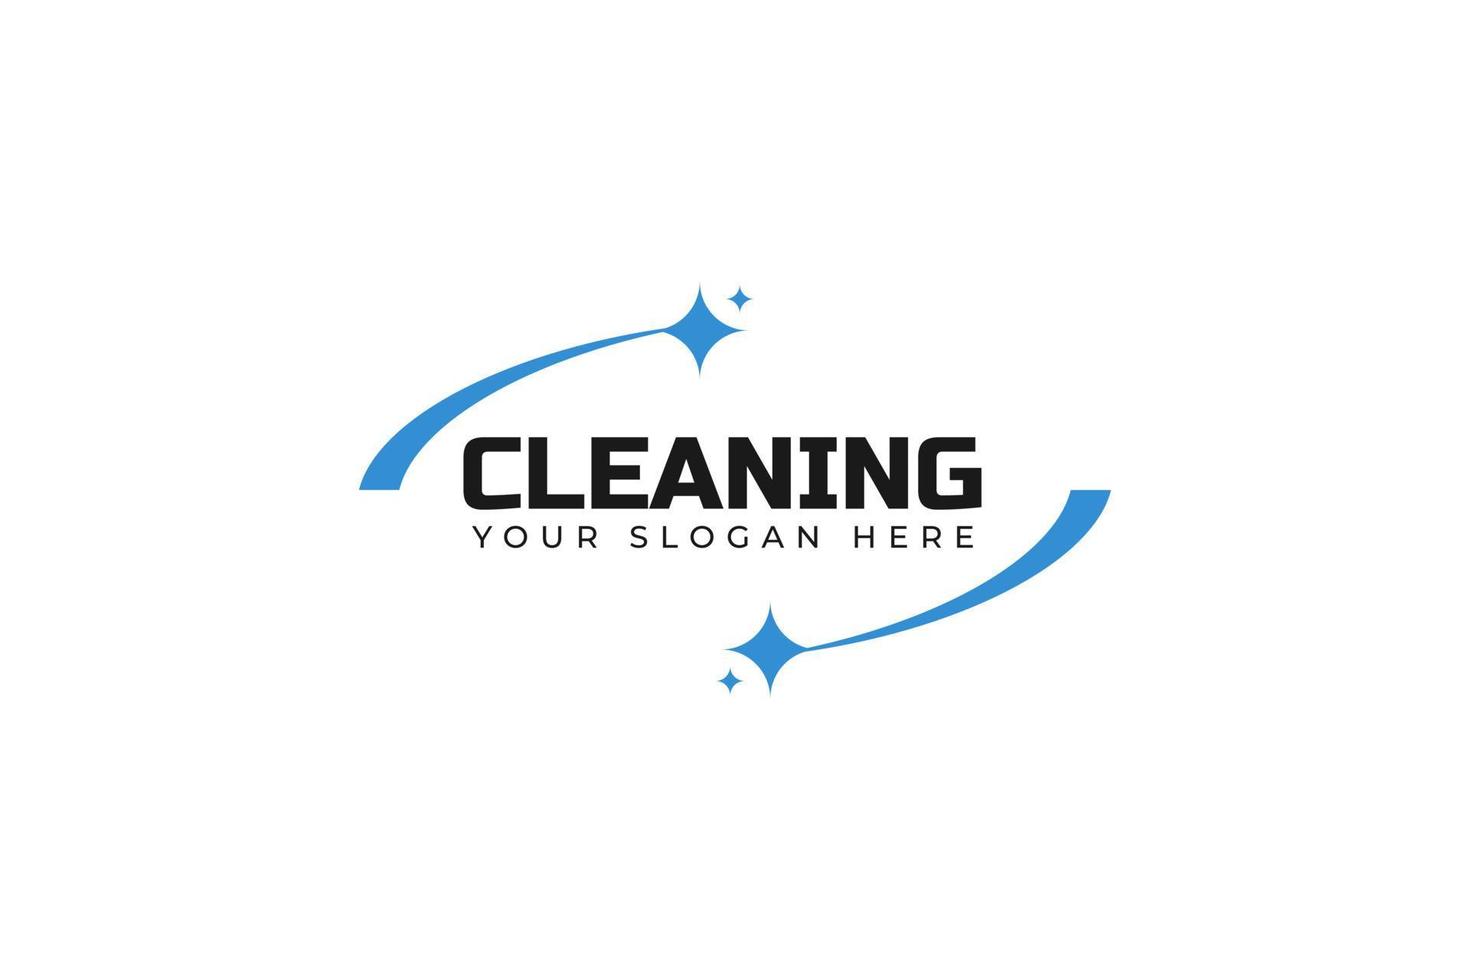 Cleaning logo design vector